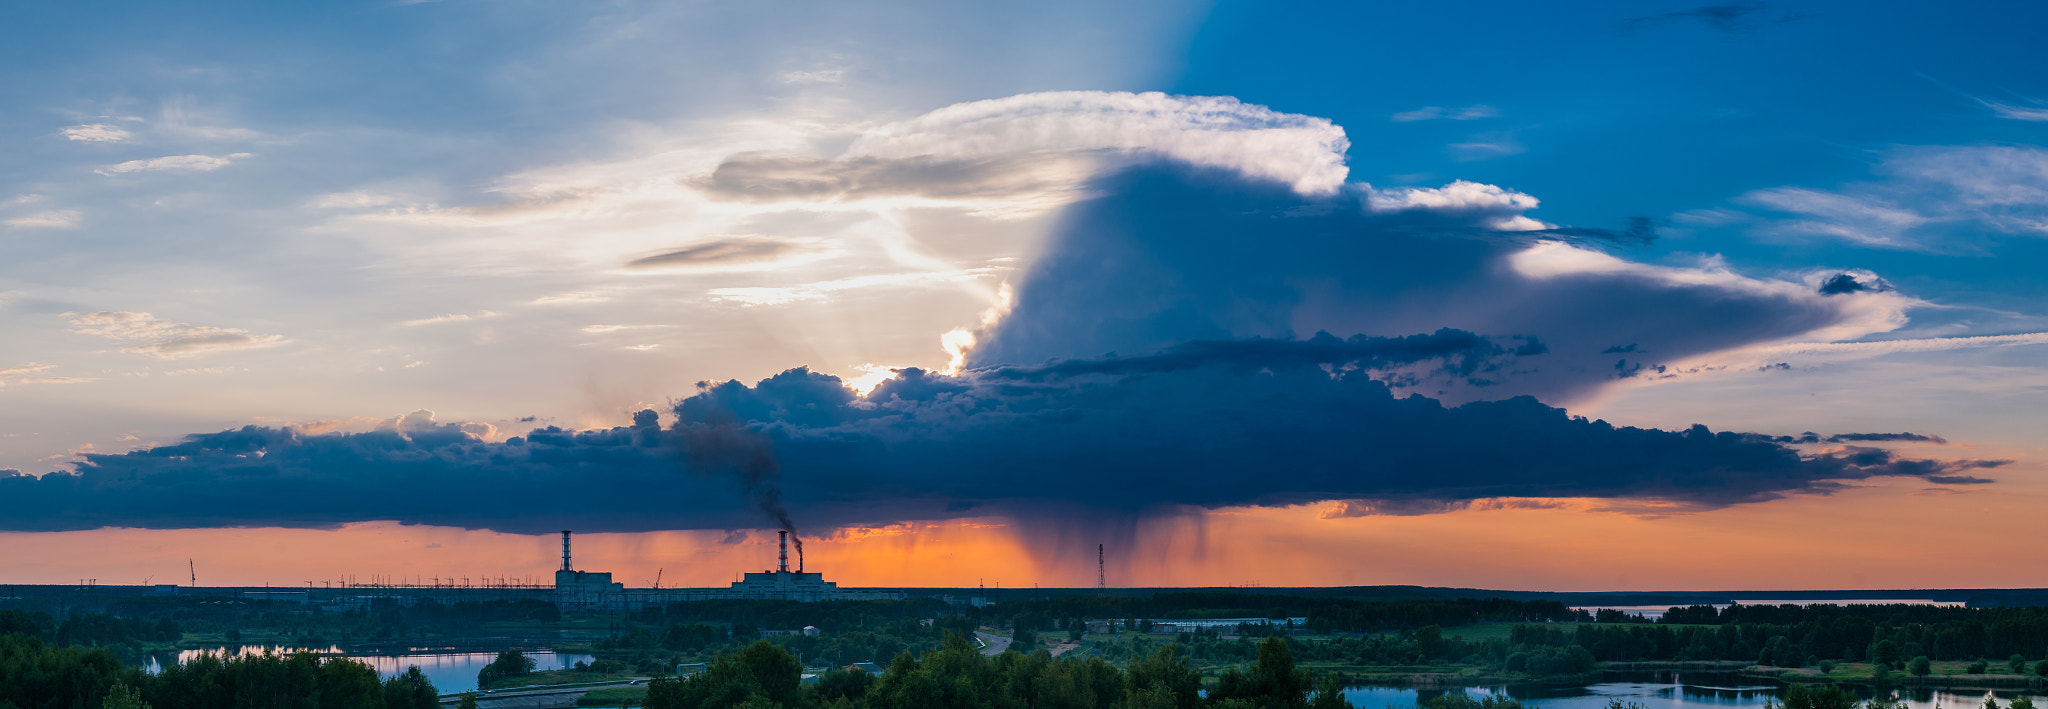 Nikon D300S sample photo. Nuclear power plant with an intense golden and cloudy sky photography